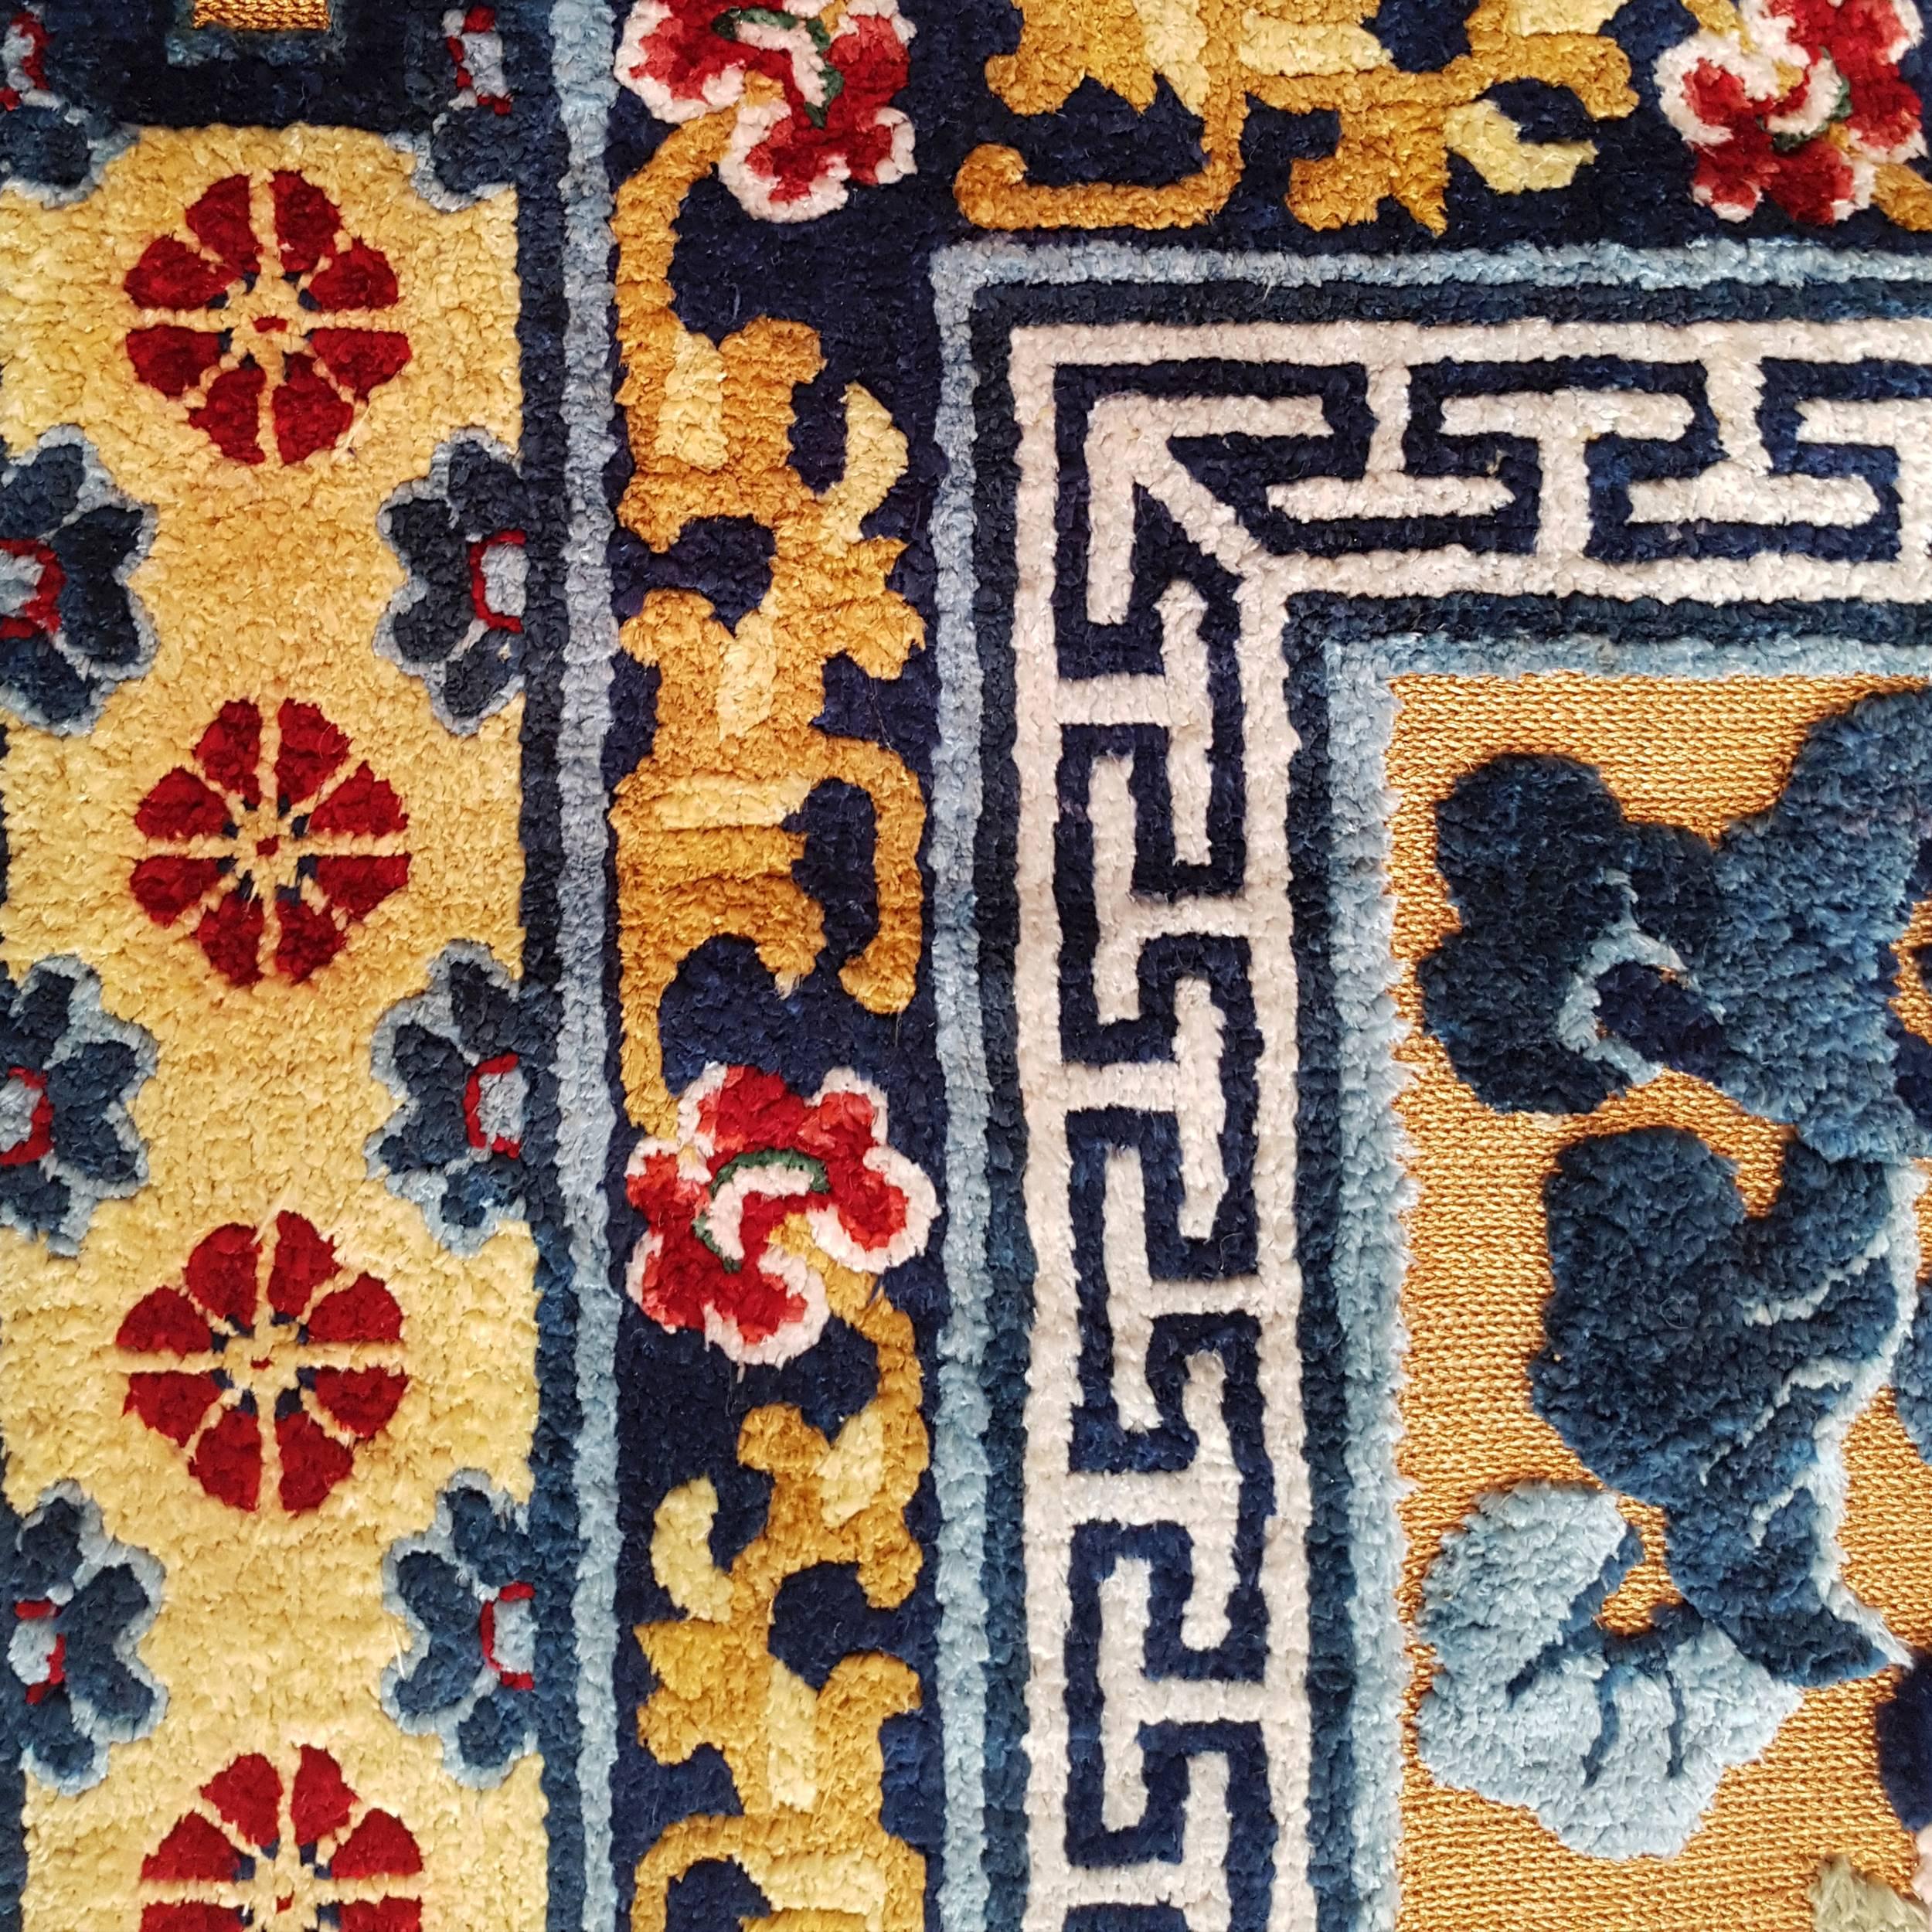 Woven Silk and Metallic Thread Chinese Rug with Lotus Flowers